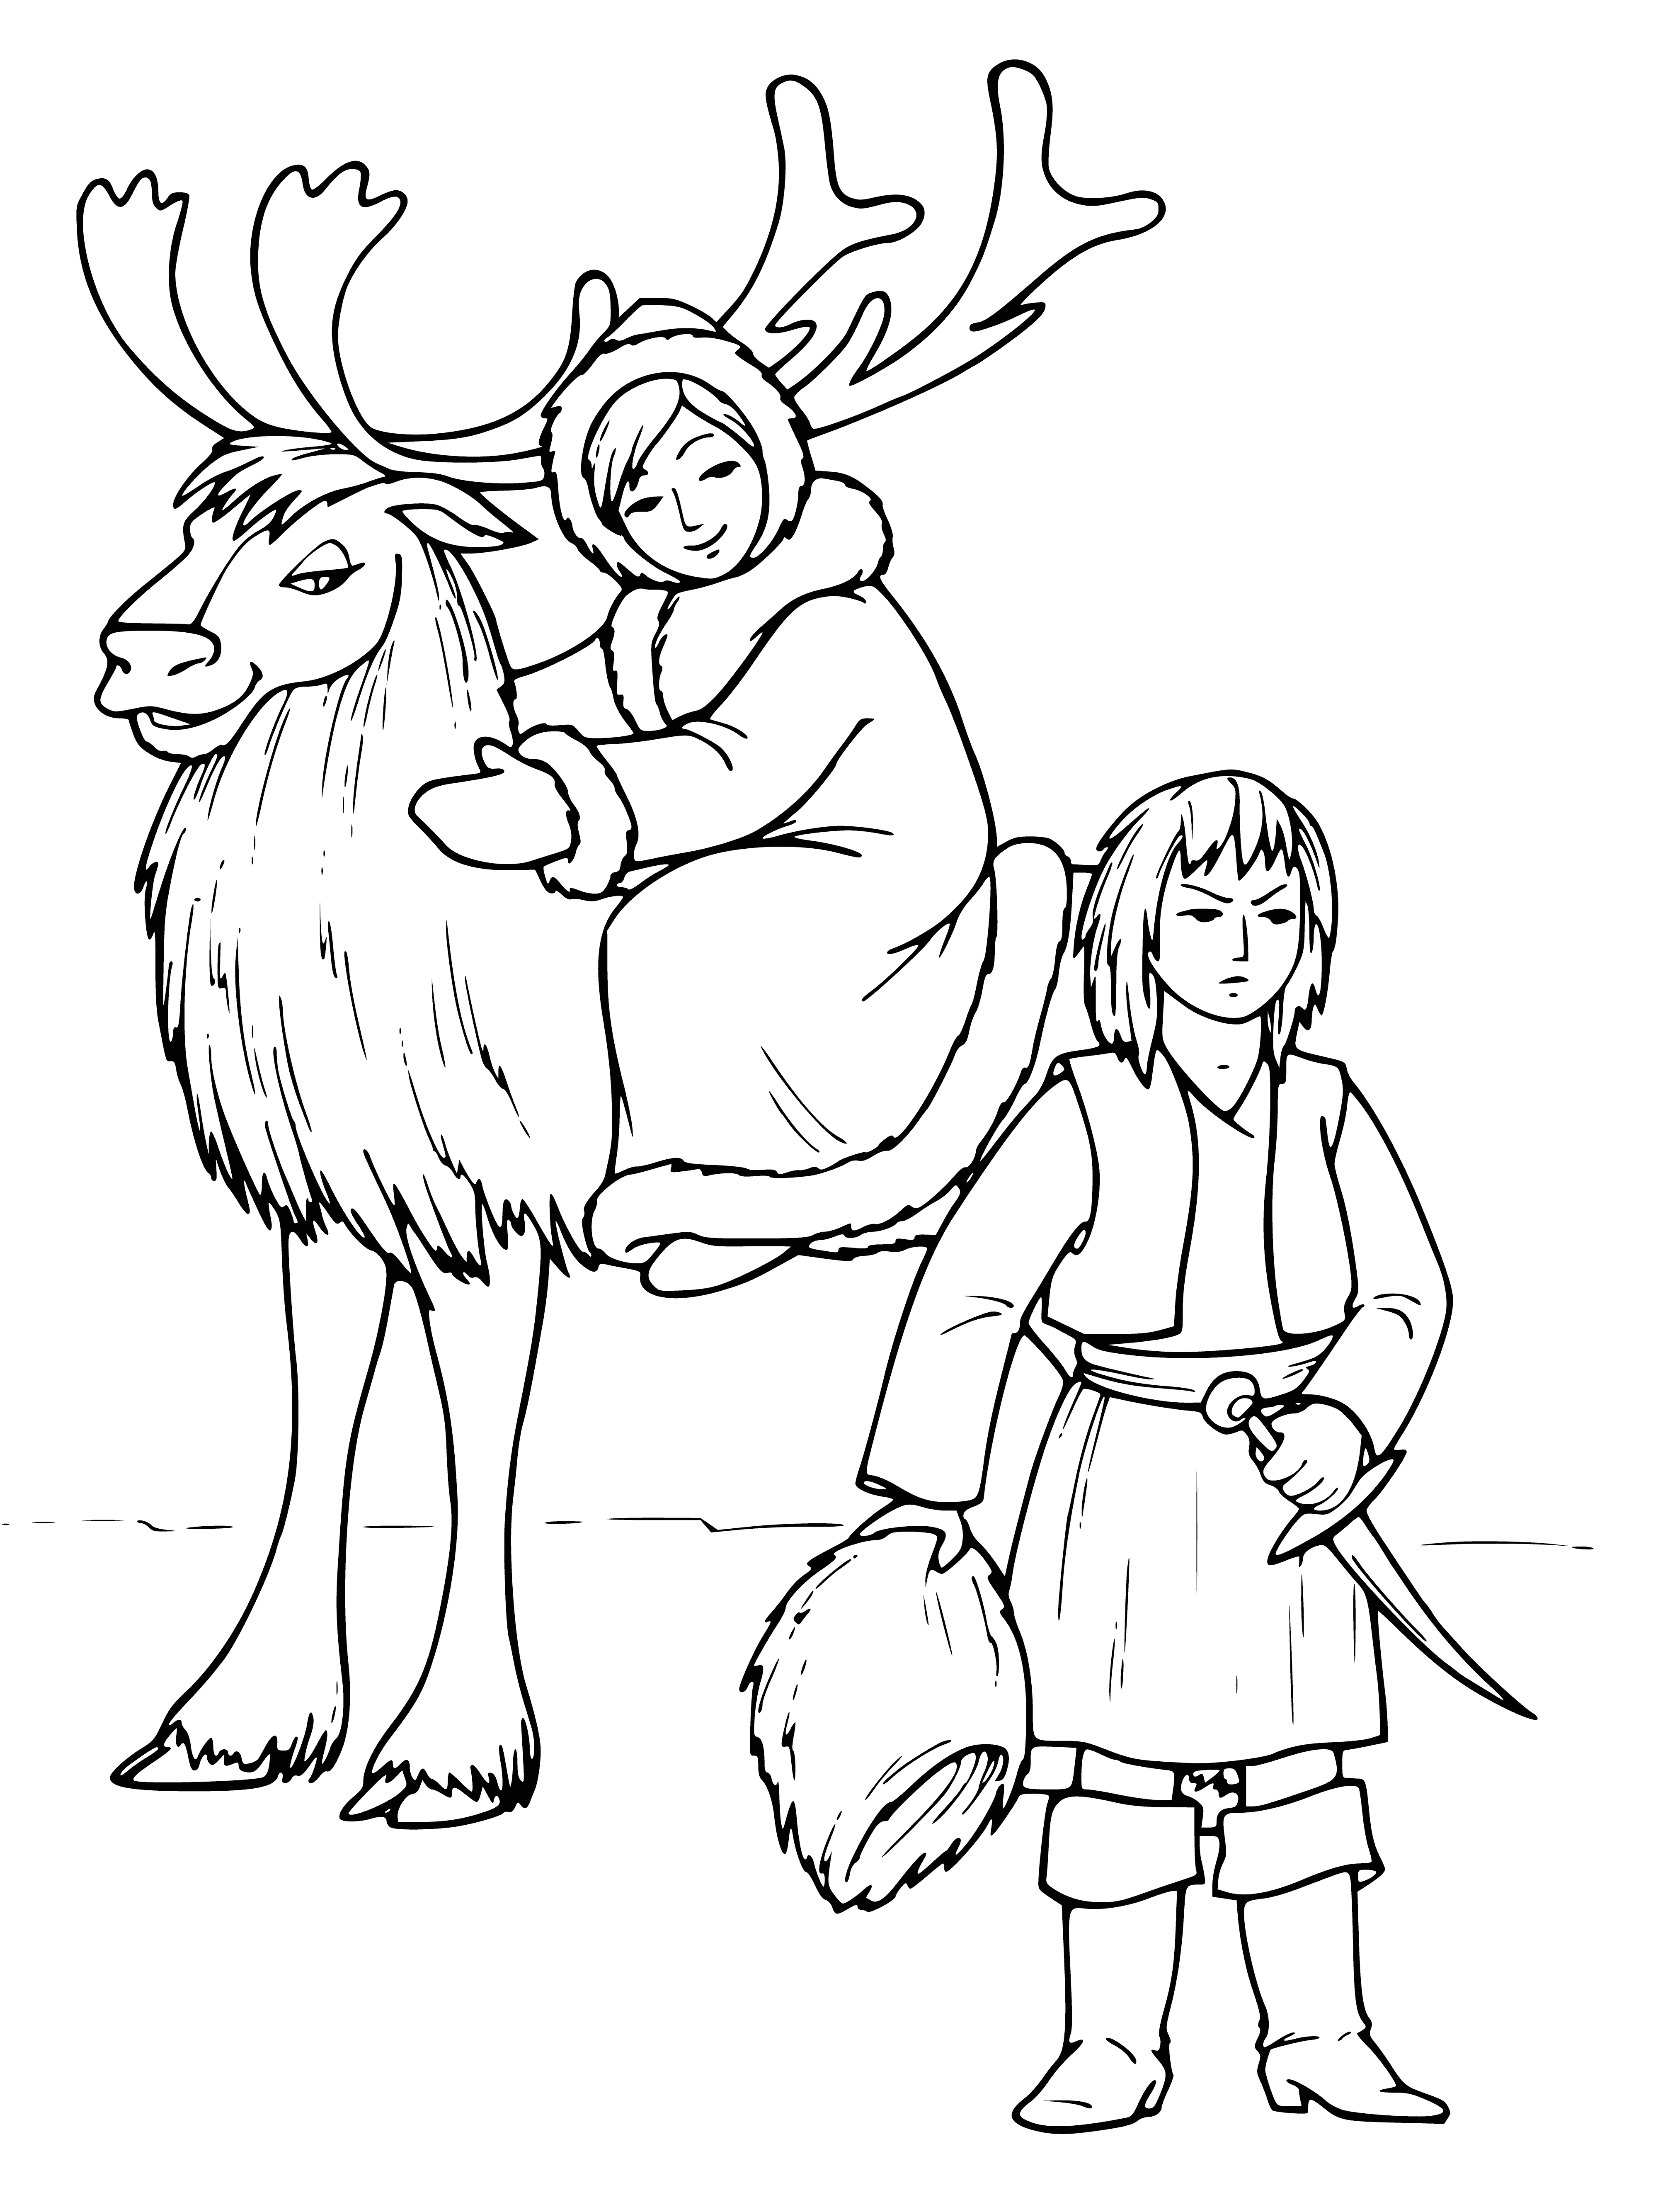 coloring page: Girl, Gerda, travels though snow-covered landscape to castle to find her friend, the little robber, who she eventually succeeds in taking him home with her, hand in hand. #Fairytale